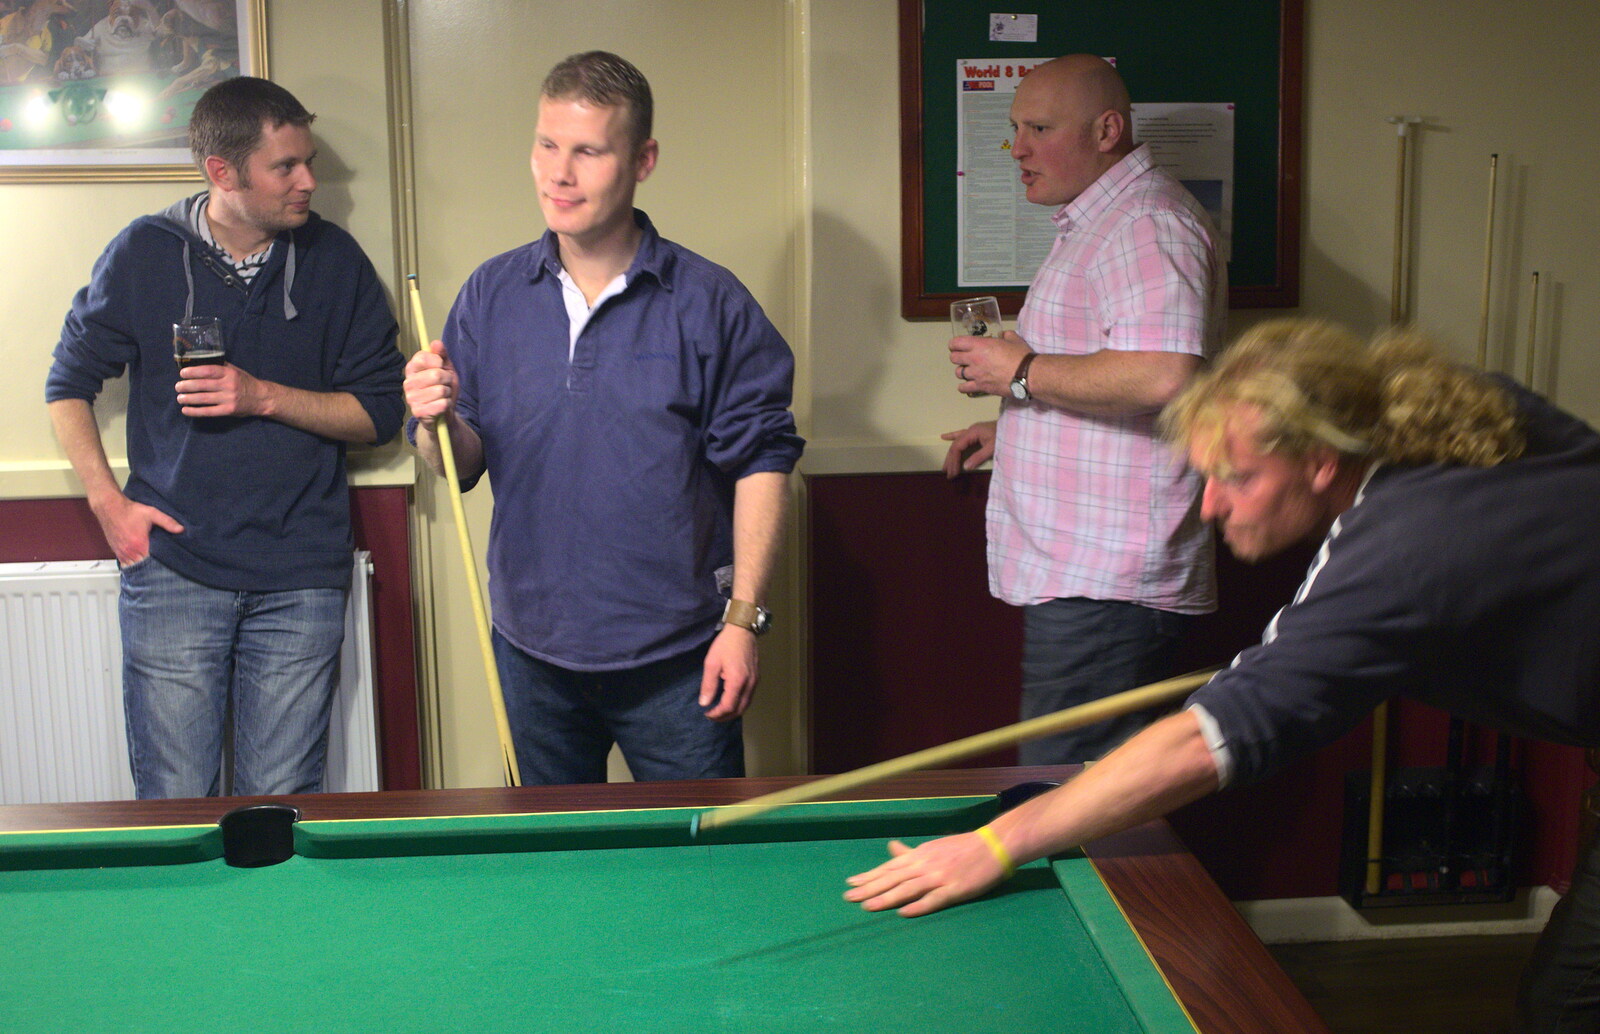 Wavy has a go from Stick Game at the Cross Keys, Redgrave, Suffolk - 20th July 2012